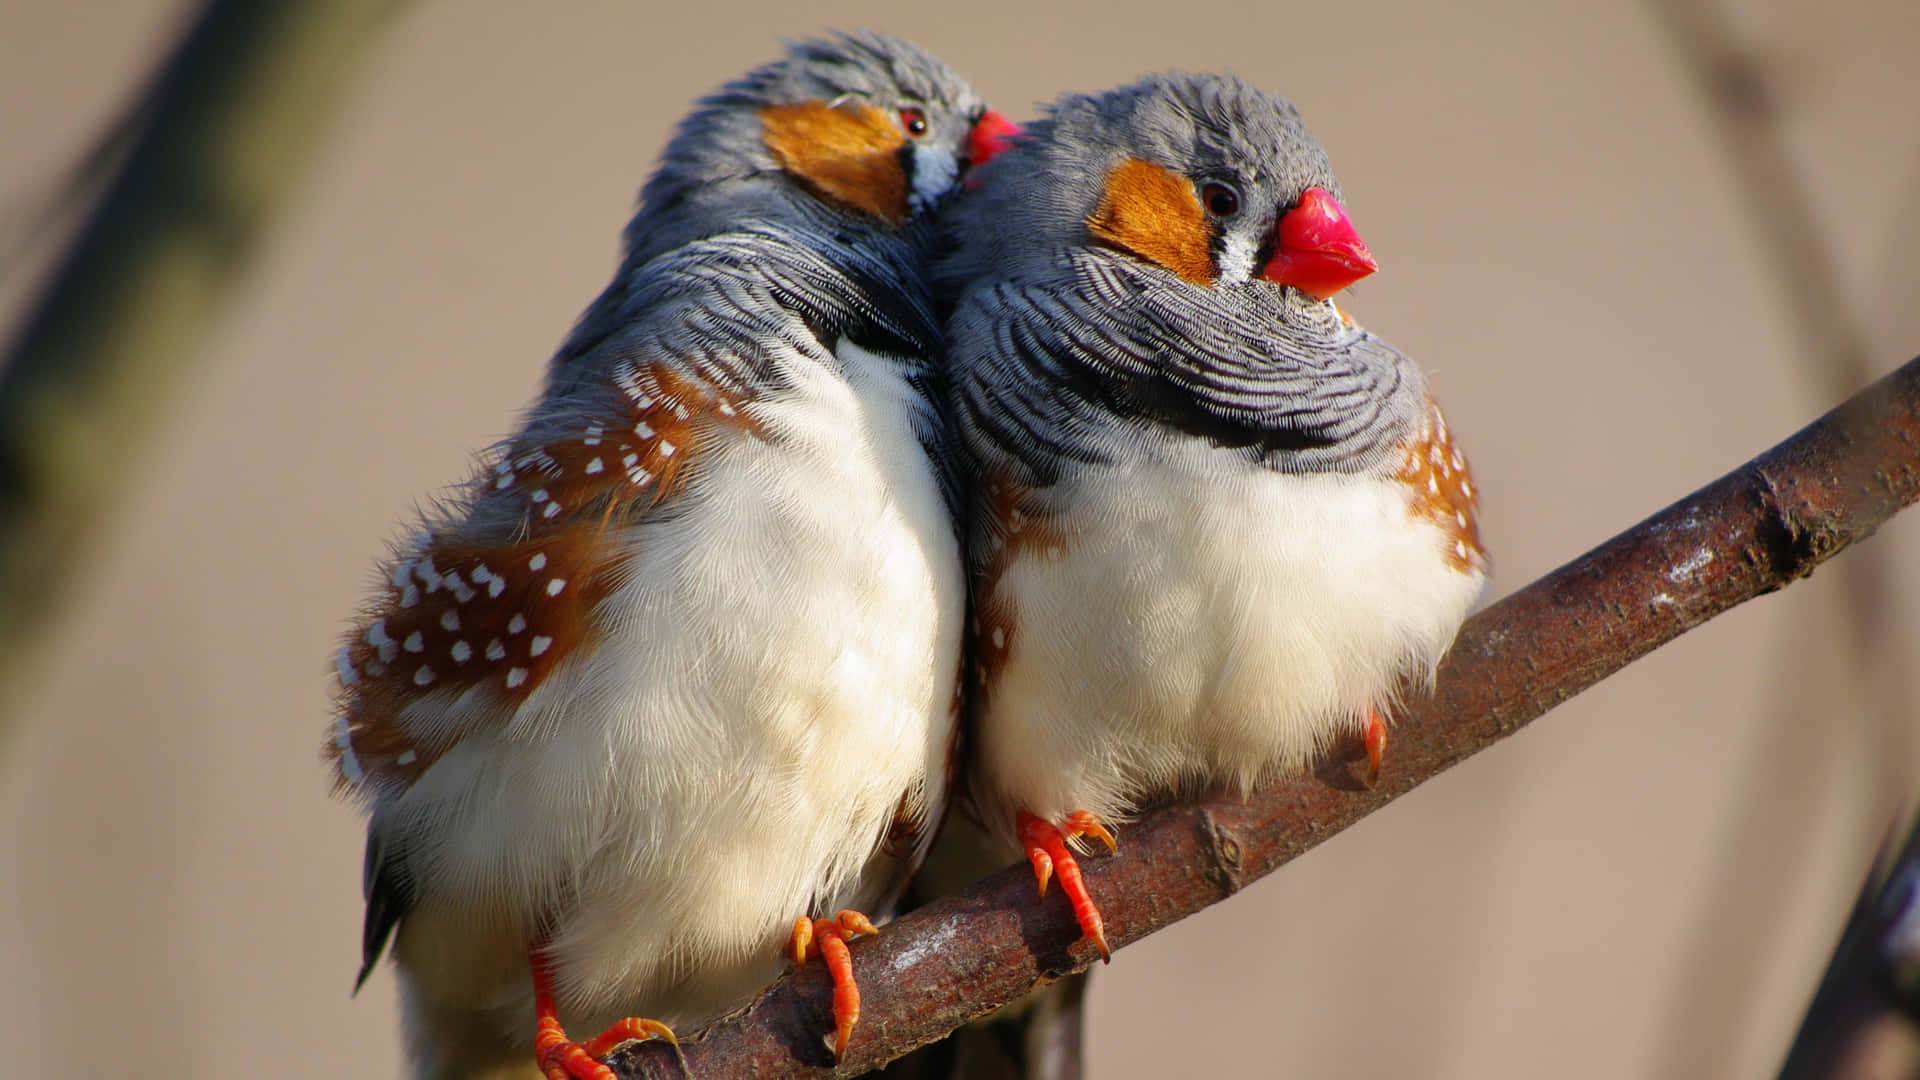 Zebra_ Finches_ Perched_ Together_4 K Wallpaper